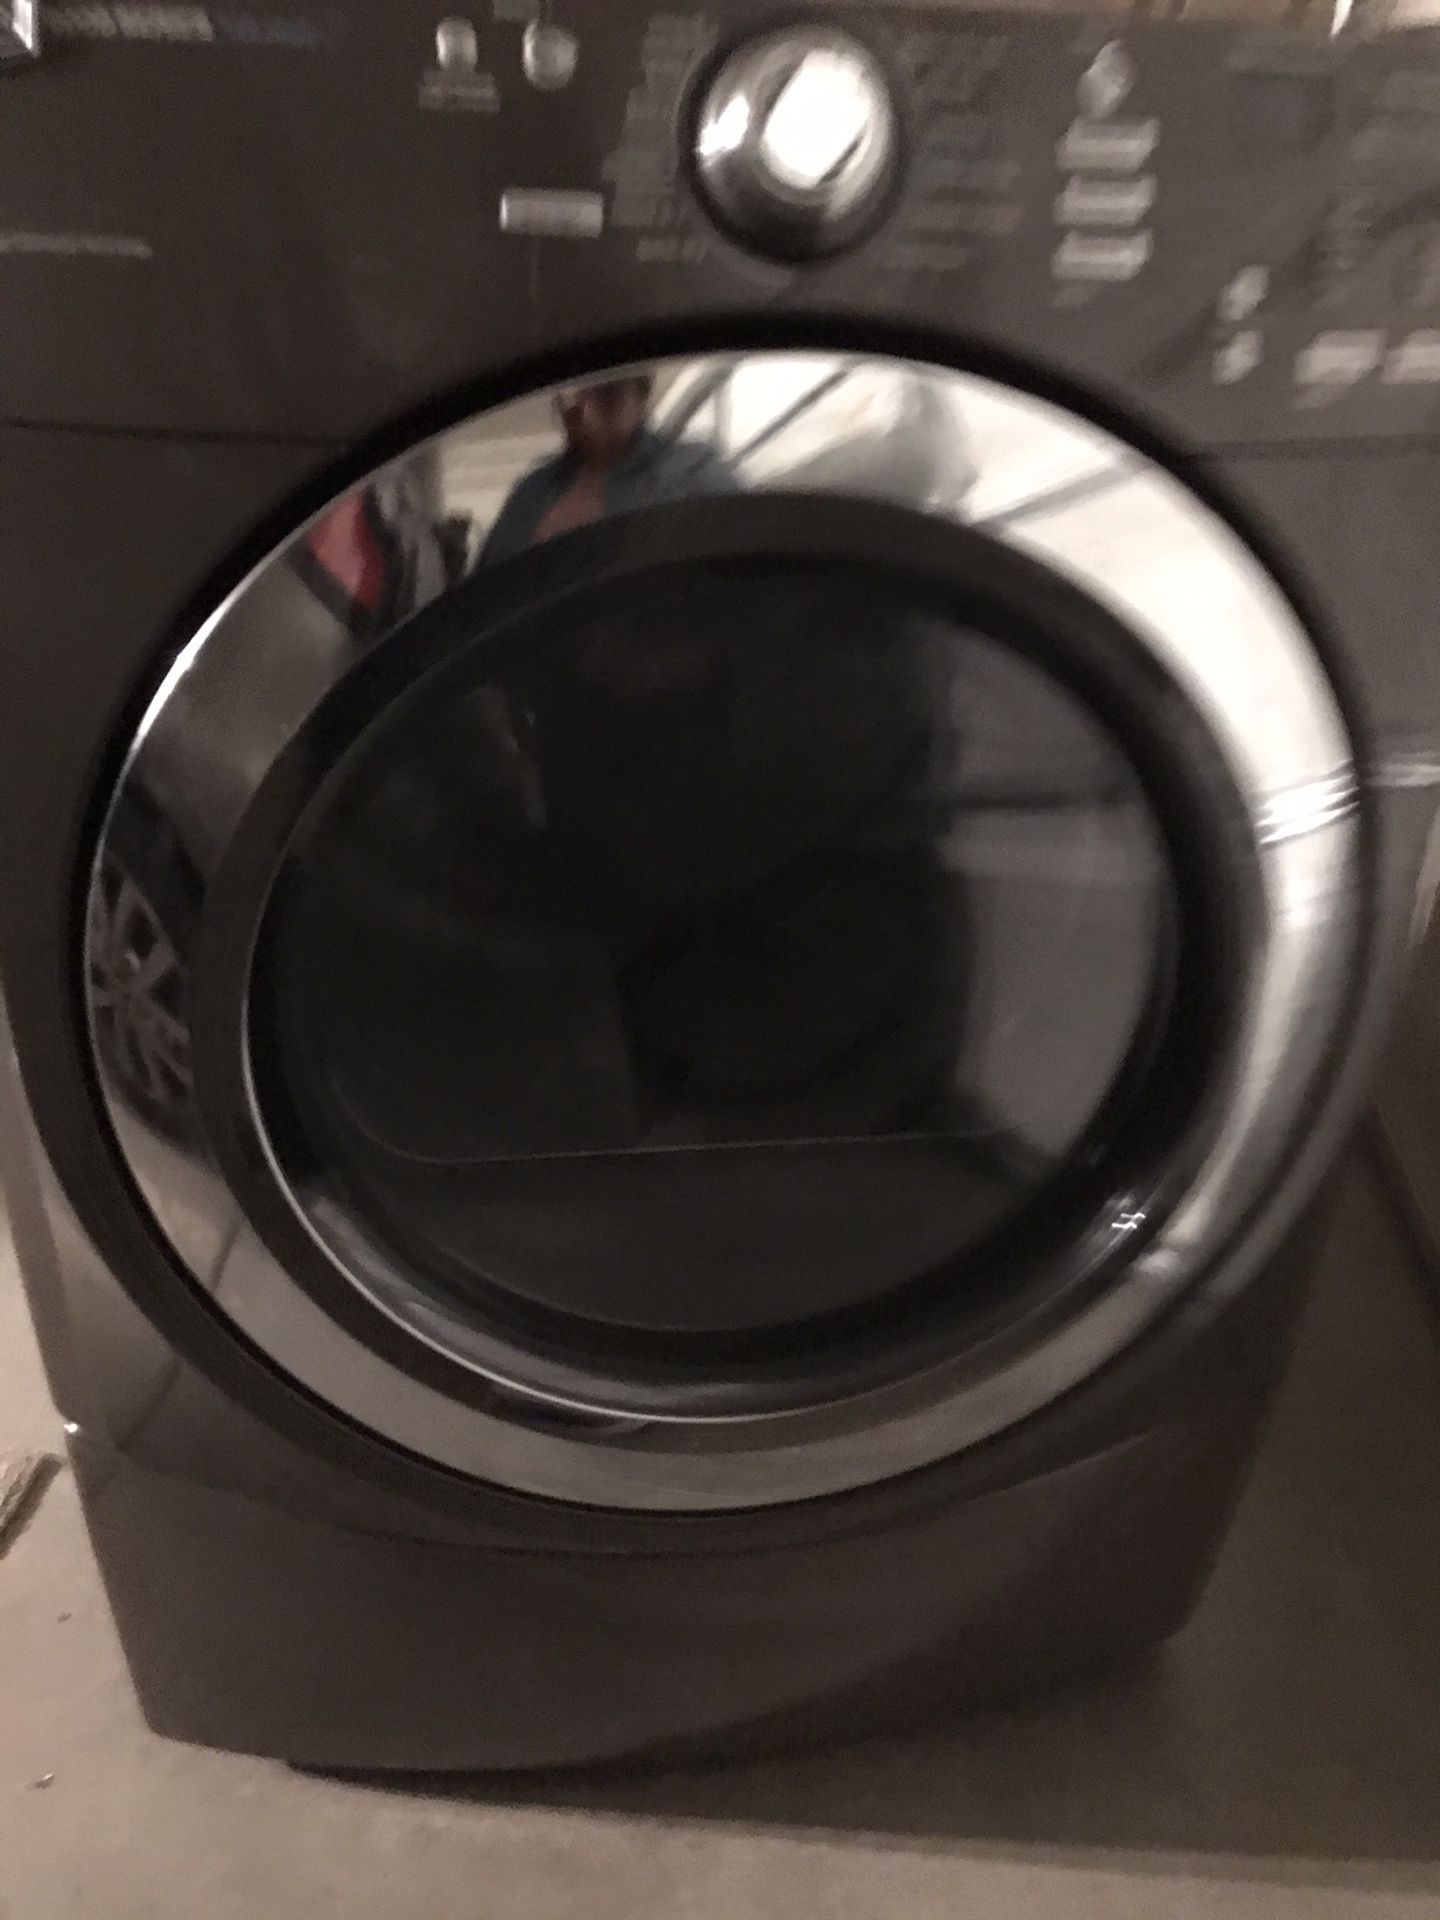 Maytag Dryer 9000 Series with steamer